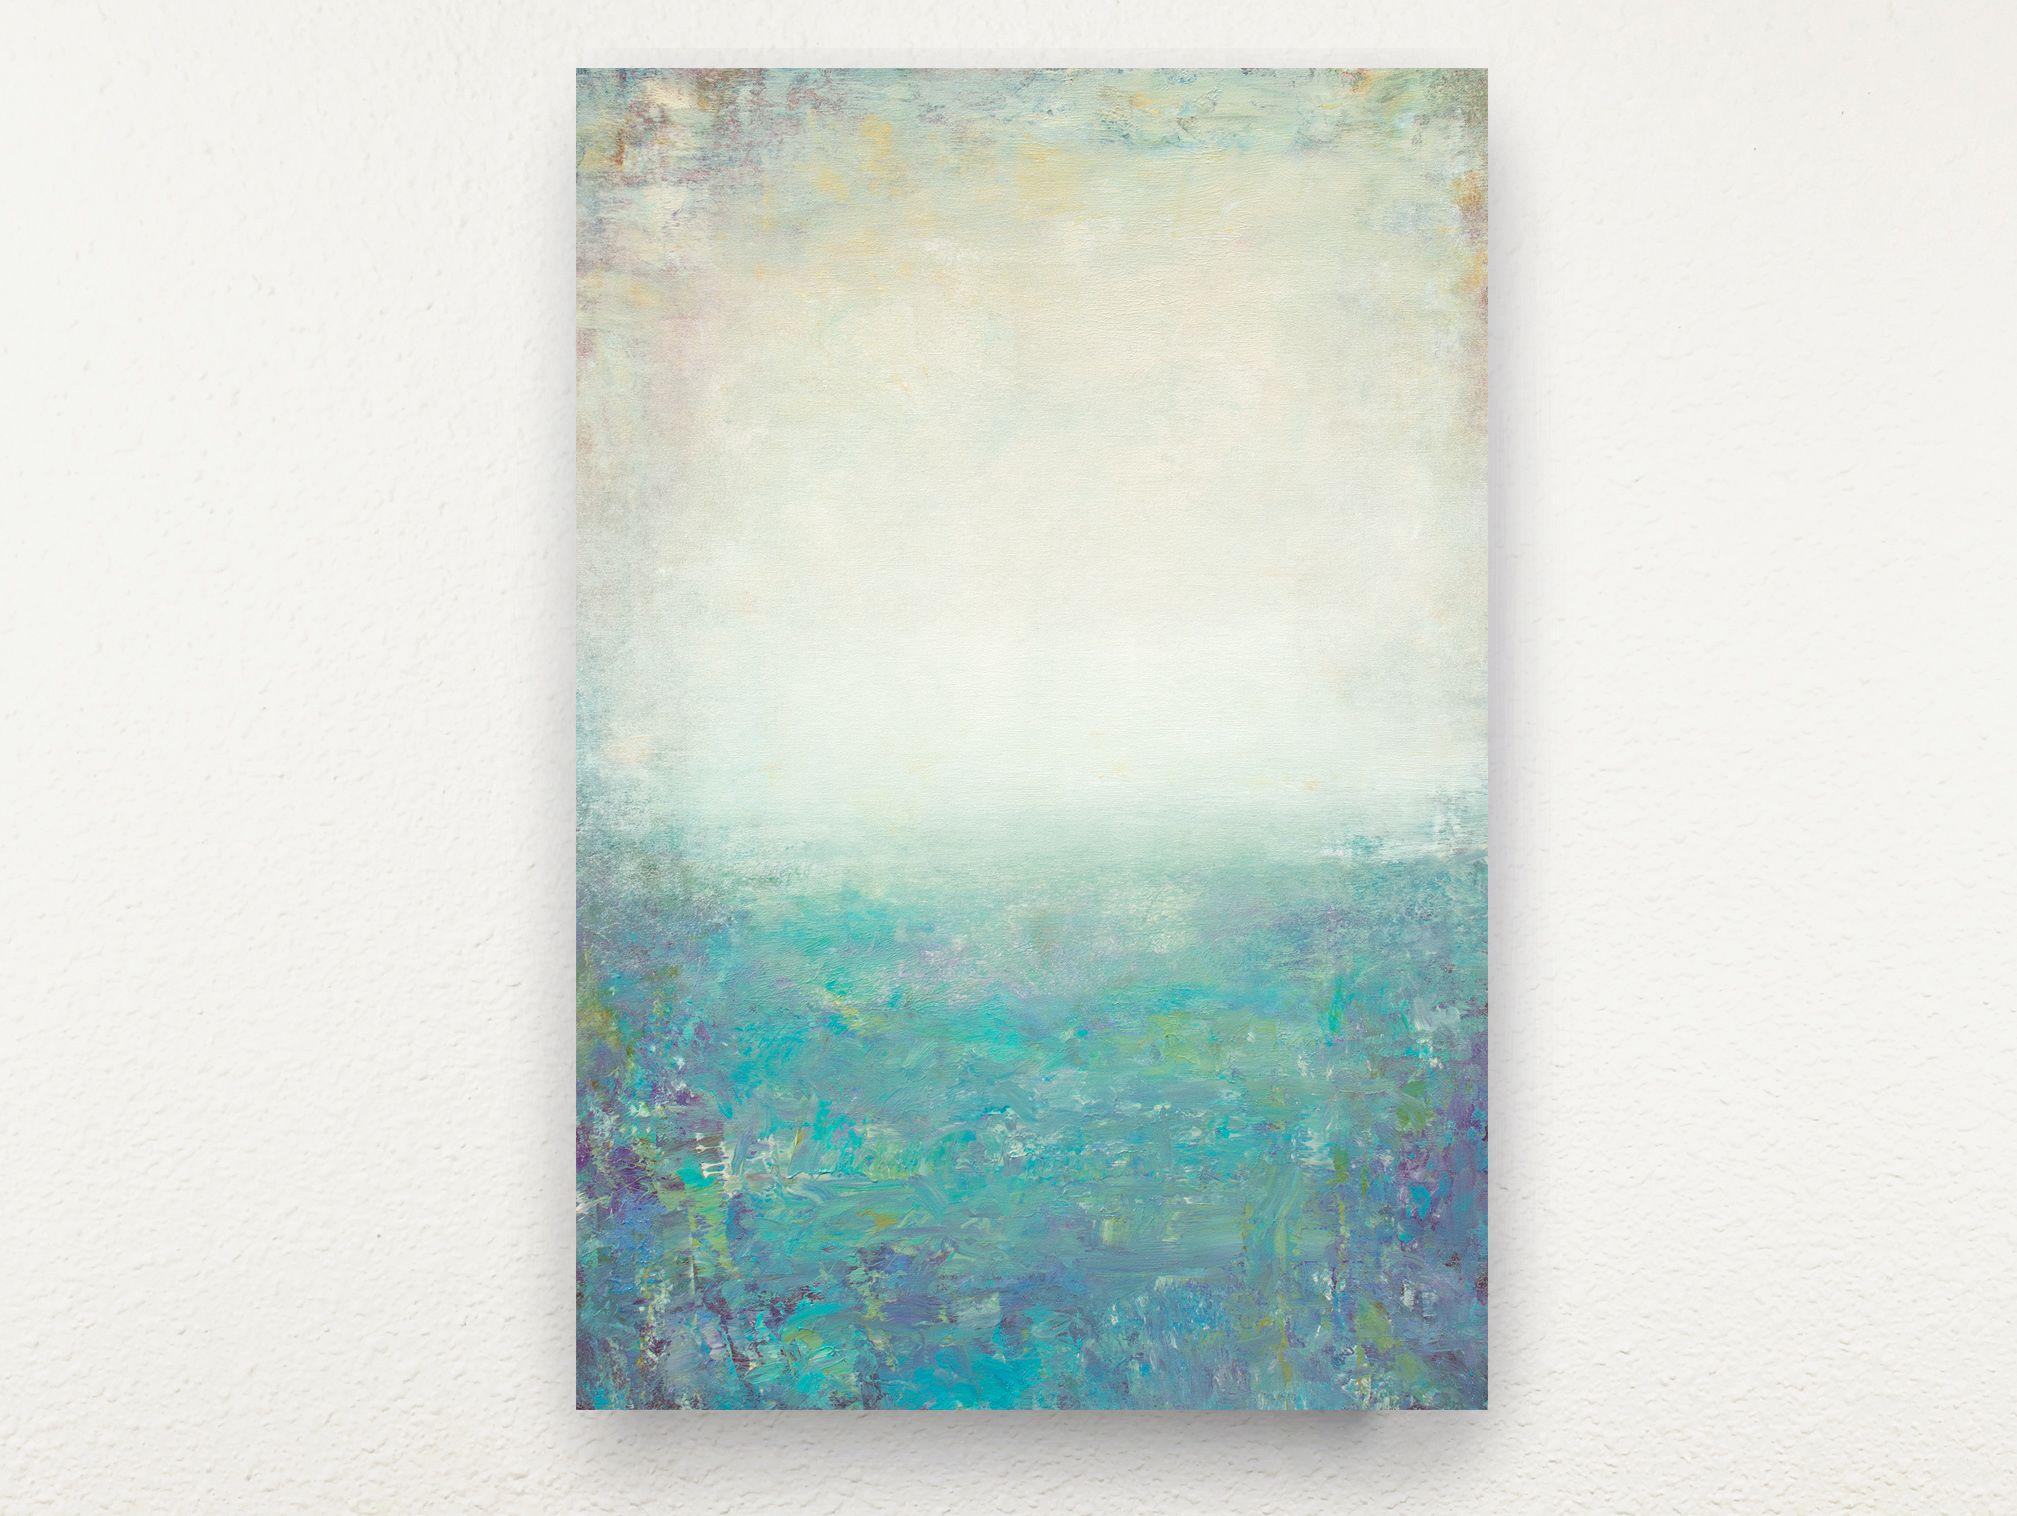 Aqua Turquoise 211106, Painting, Acrylic on Canvas - Gray Abstract Painting by Don Bishop